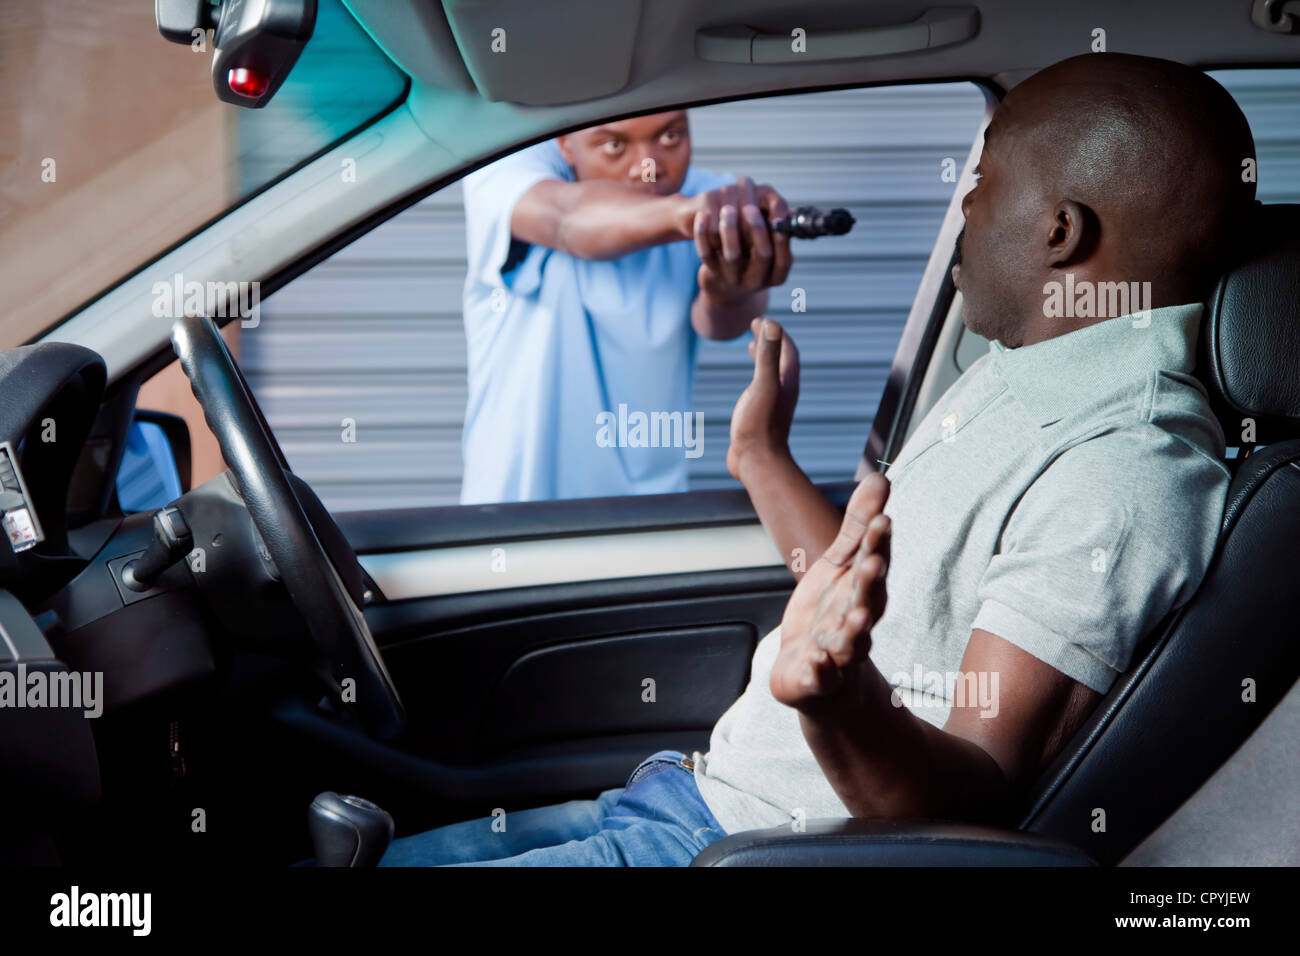 Inside view of a man getting hijacked in his car Stock Photo